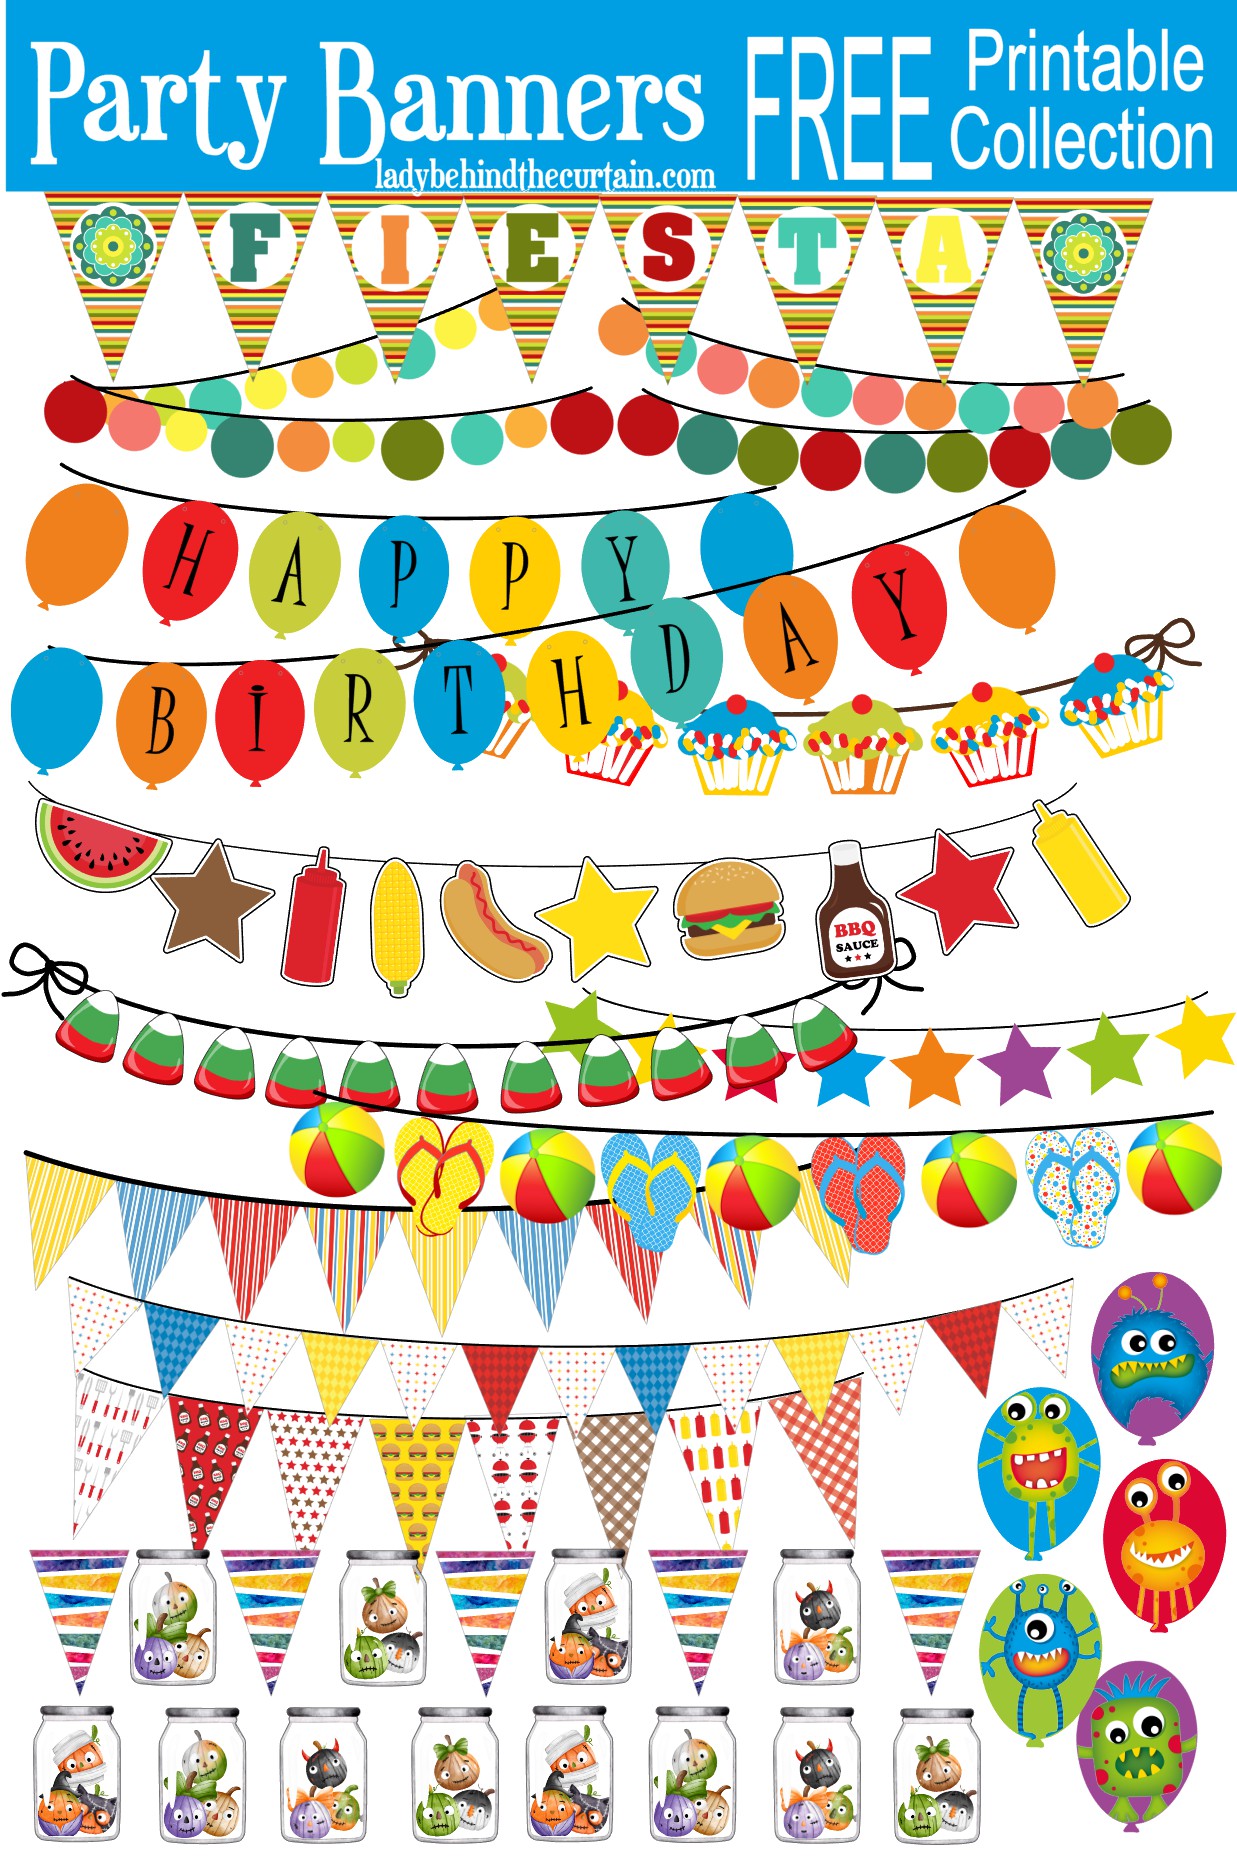 Party Banners For Every Occasion FREE Printable Collection